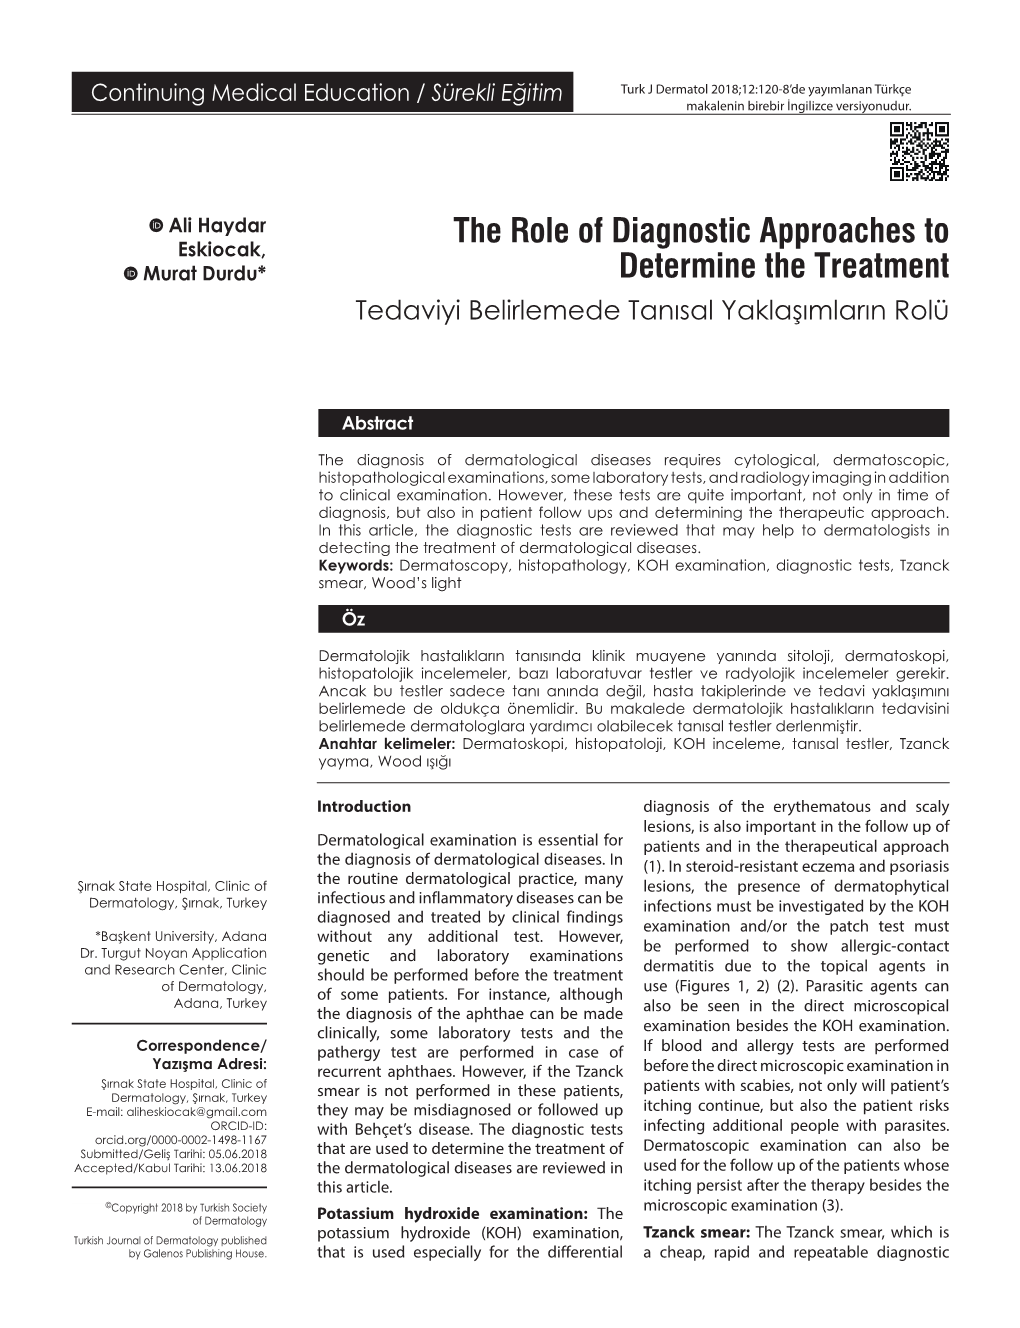 The Role of Diagnostic Approaches to Determine the Treatment